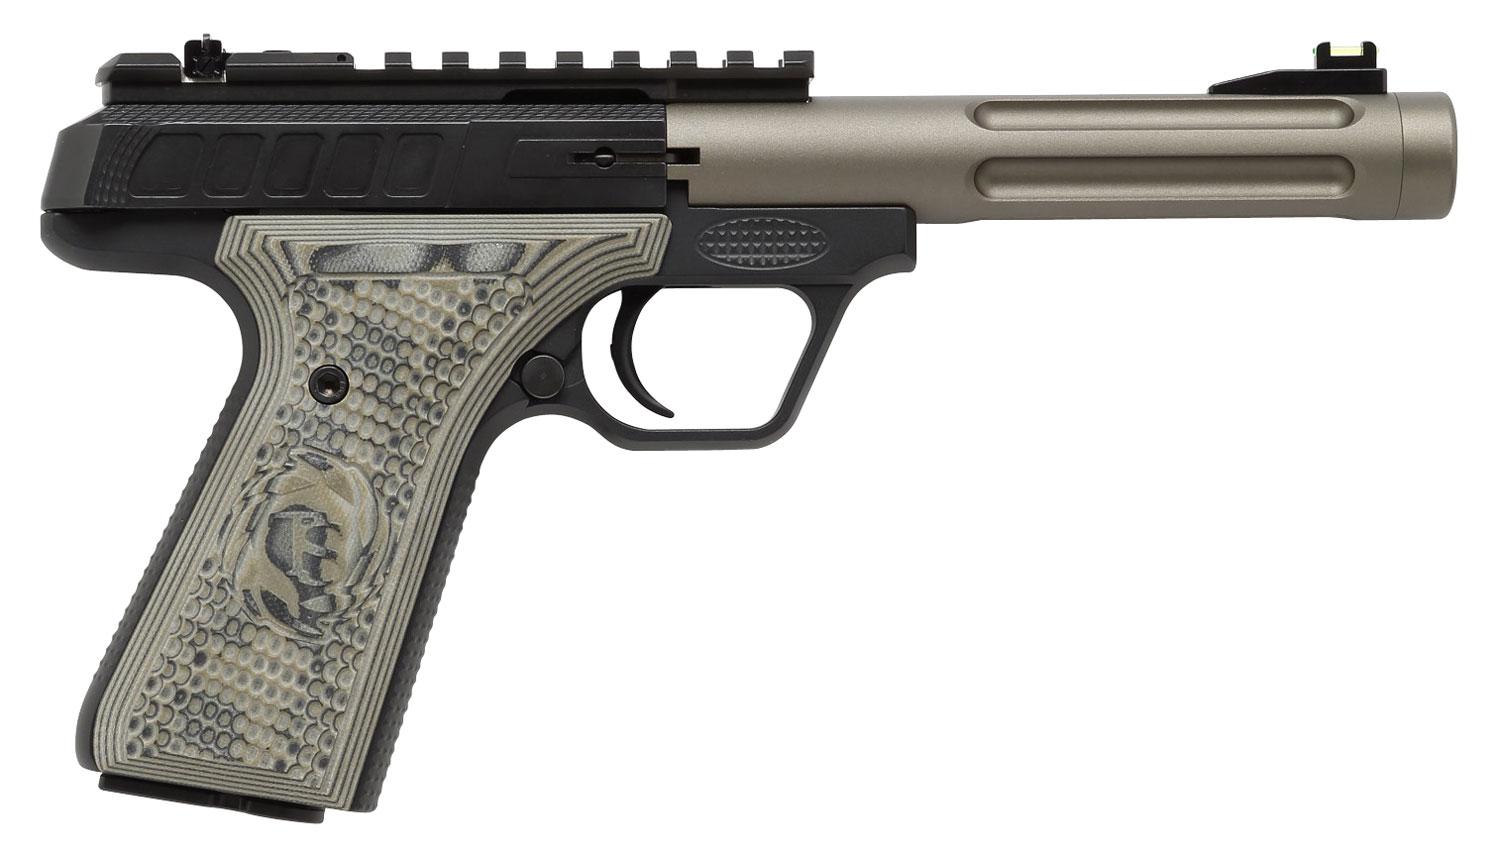 Tactical Solutions TLP-22 Pistol TLP55MODRF, 22 Long Rifle, 5.5", Gray G10 Grips, Black Hard Coat Anodized Finish, 10 Rd